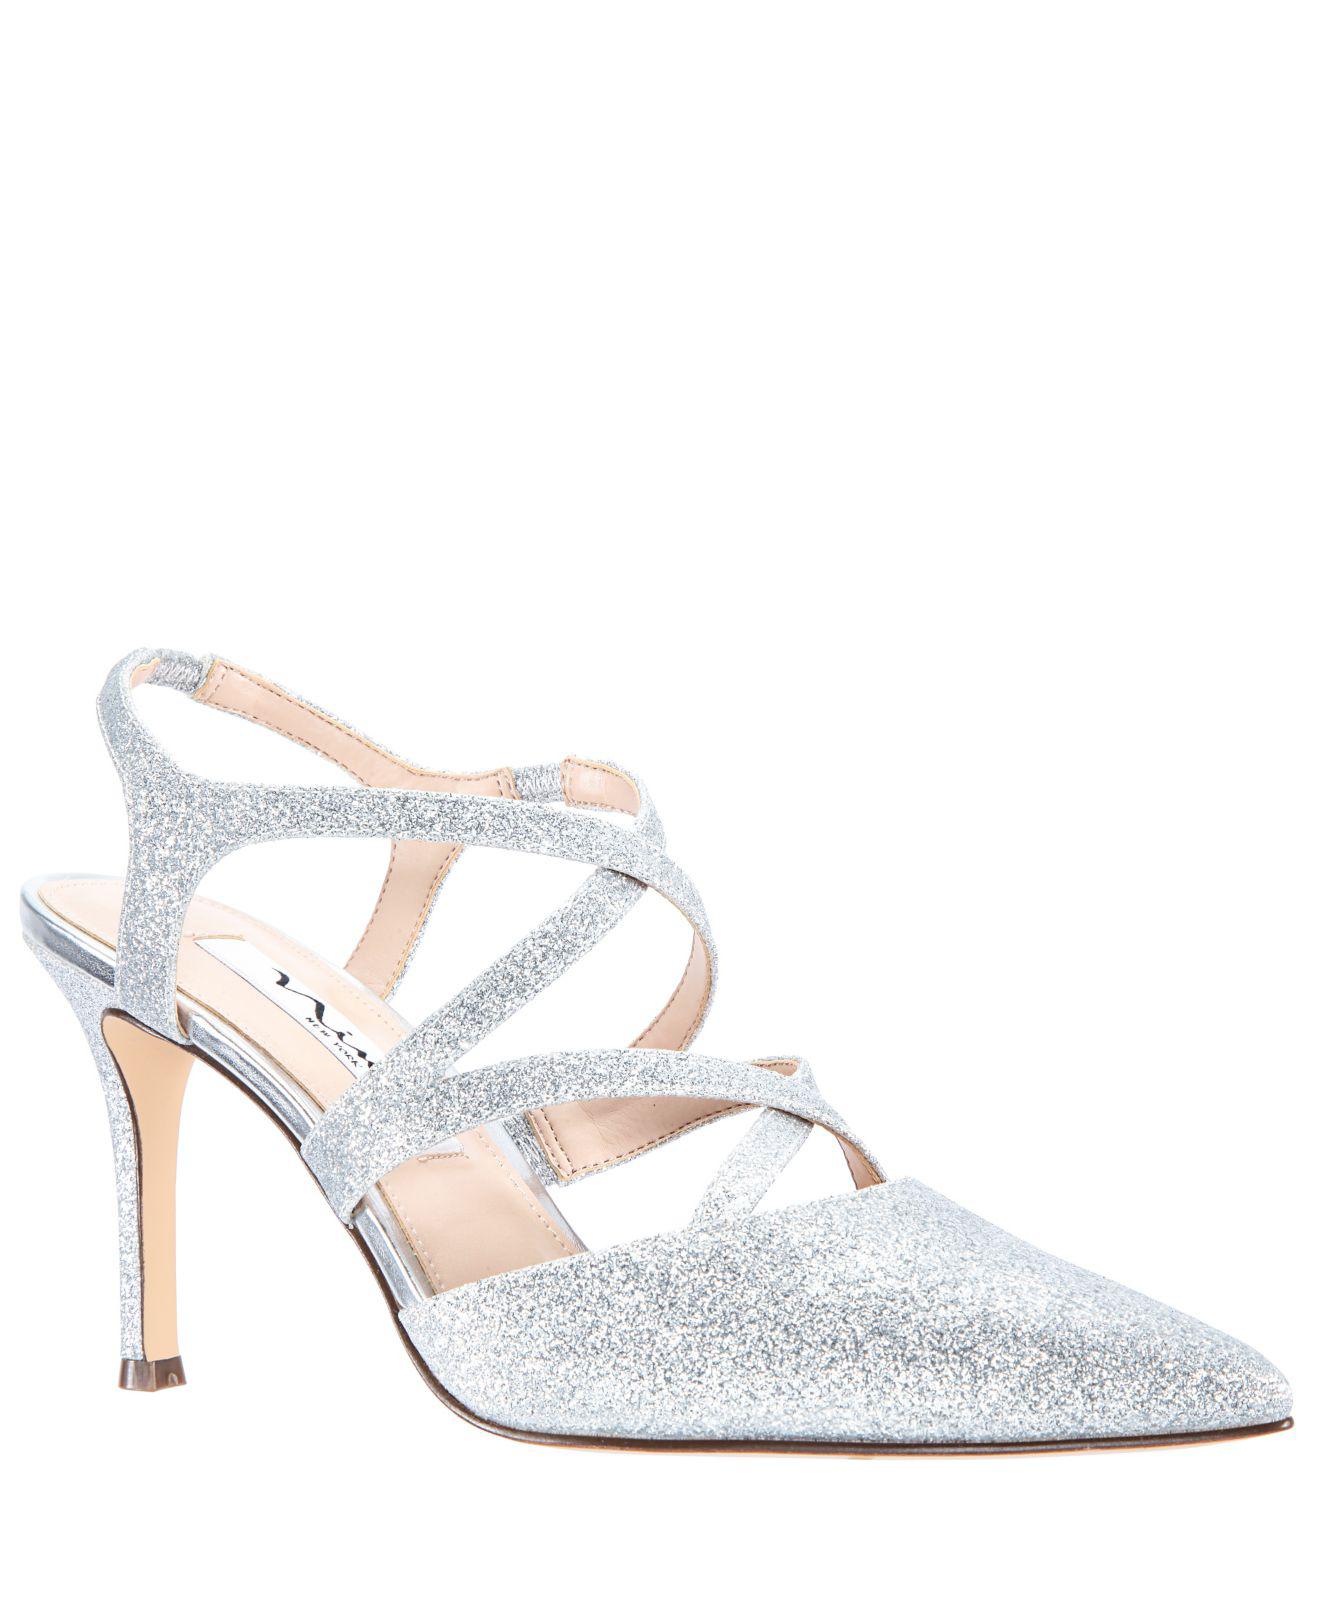 Nina Leather Cianna Pumps in Silver 